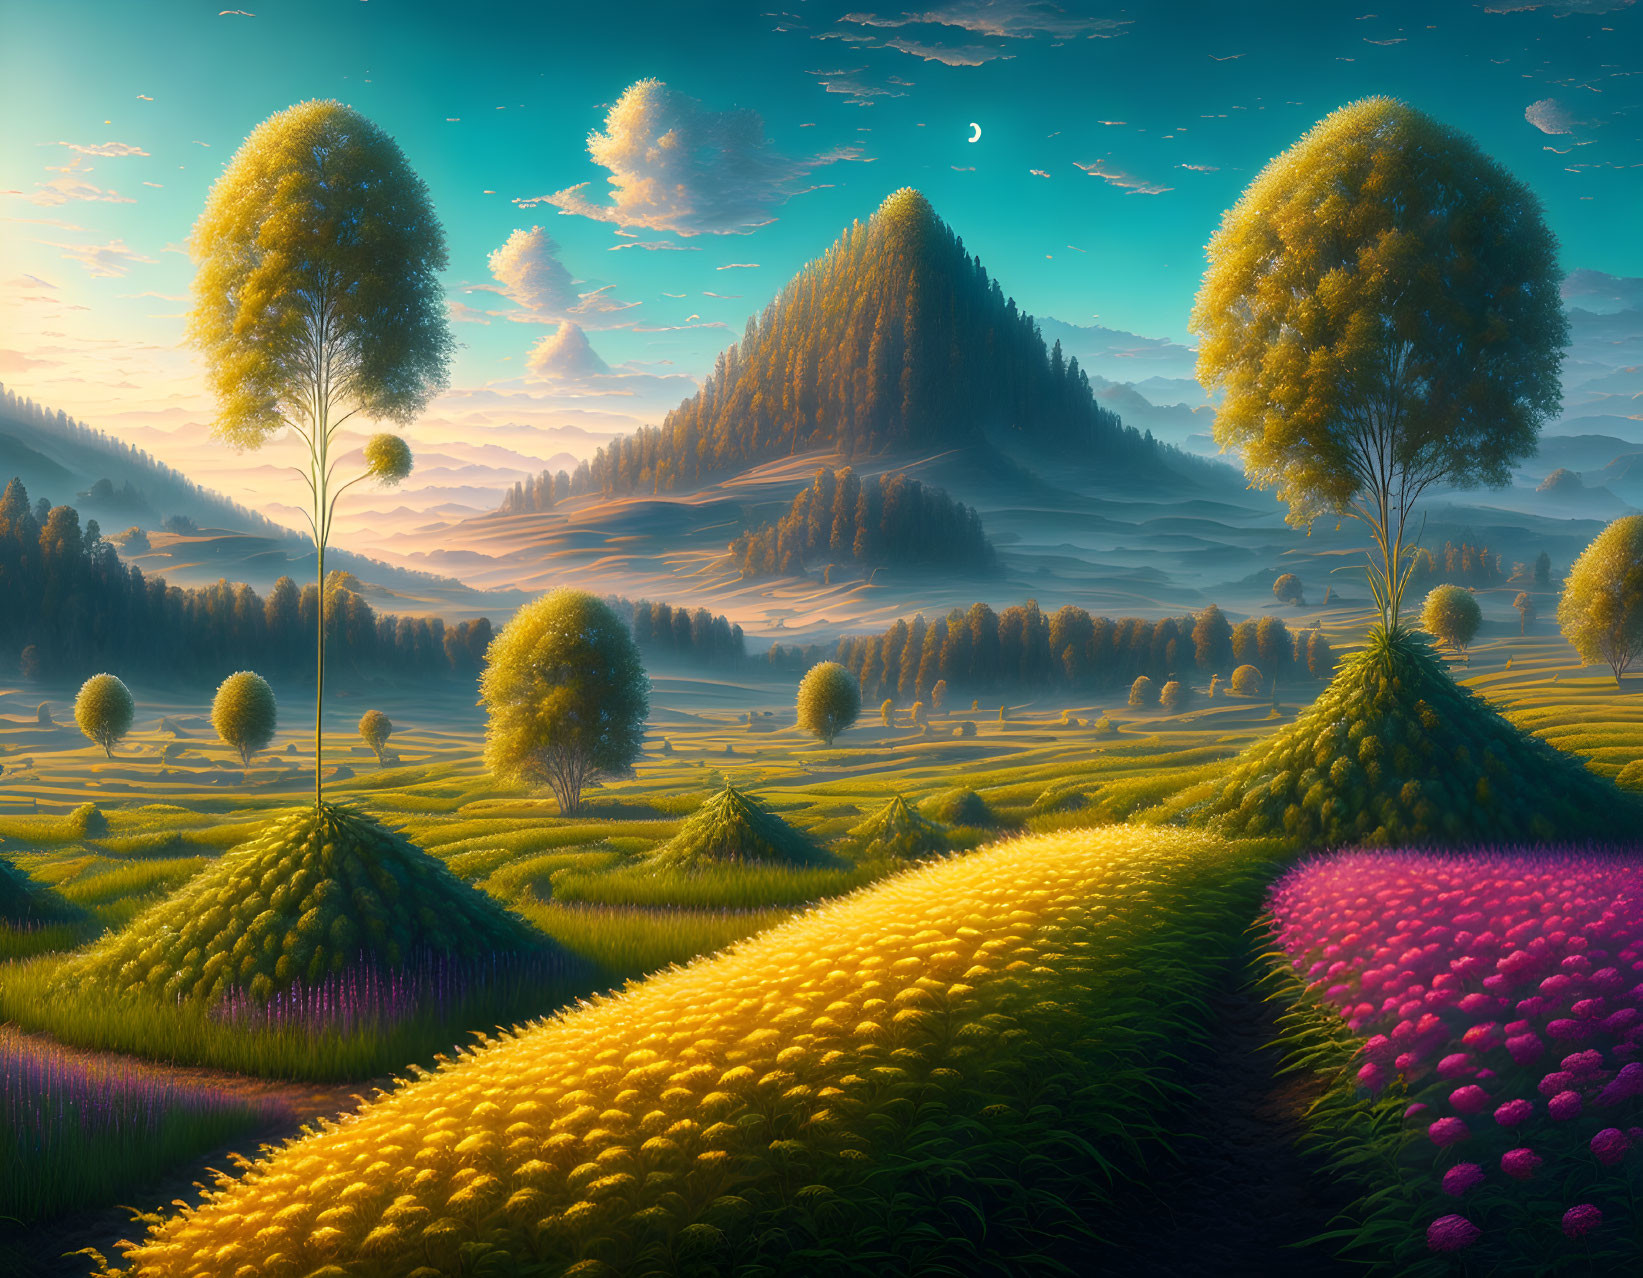 Vibrant yellow and pink grass in fantastical landscape with crescent moon